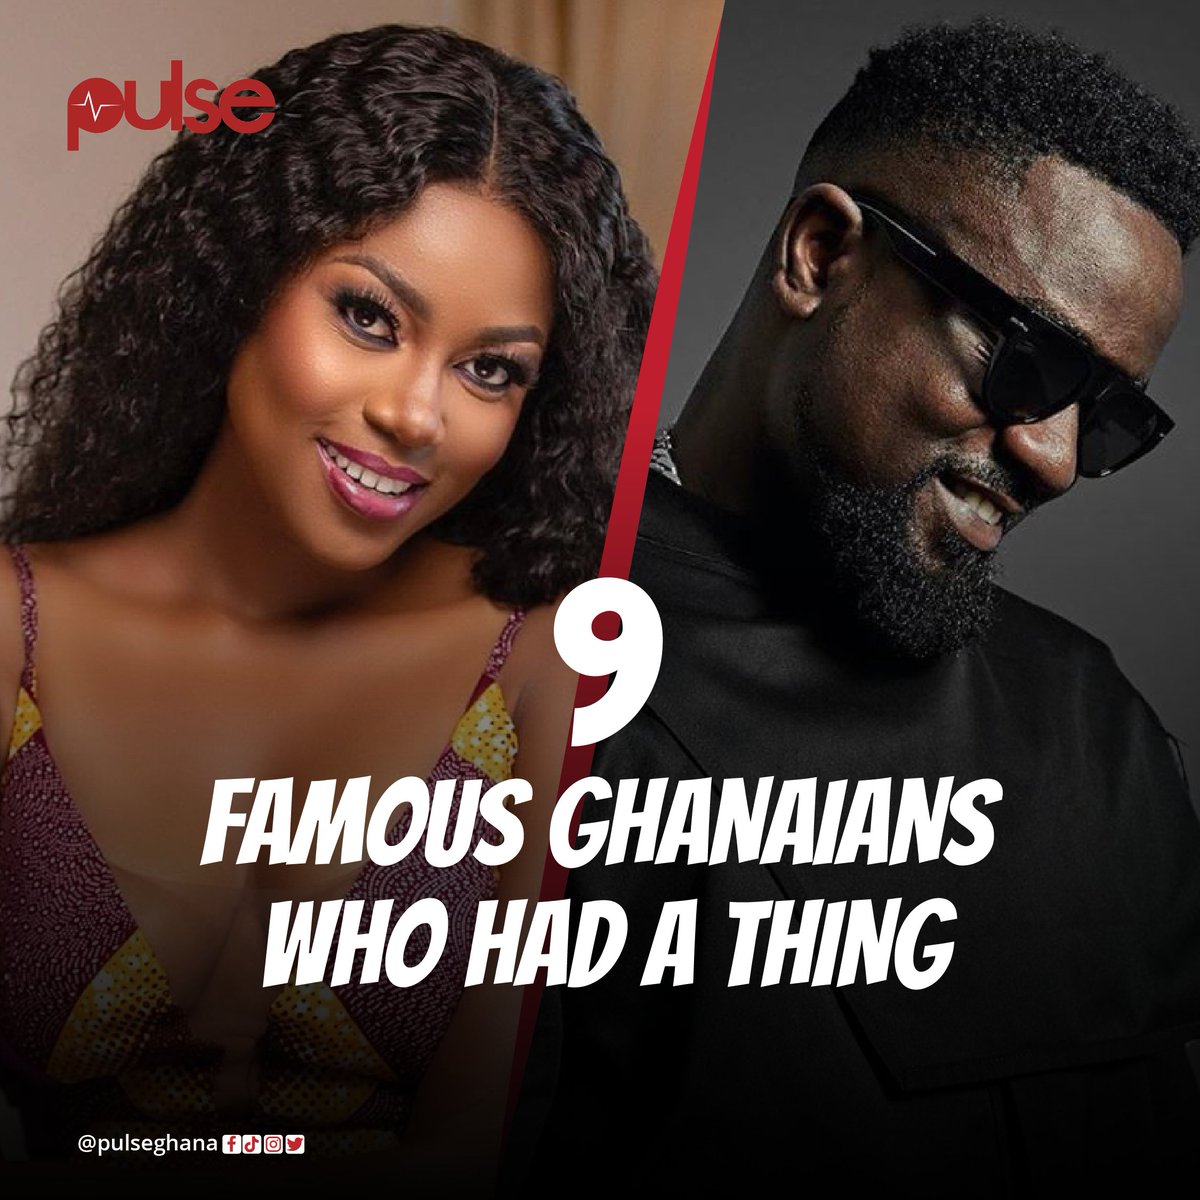 Did you know these celebrities once dated? Here's a look at 9 Ghanaian celebrity relationships you probably didn't know about.

#PulseEntertainment #CelebrityCouples

⏬